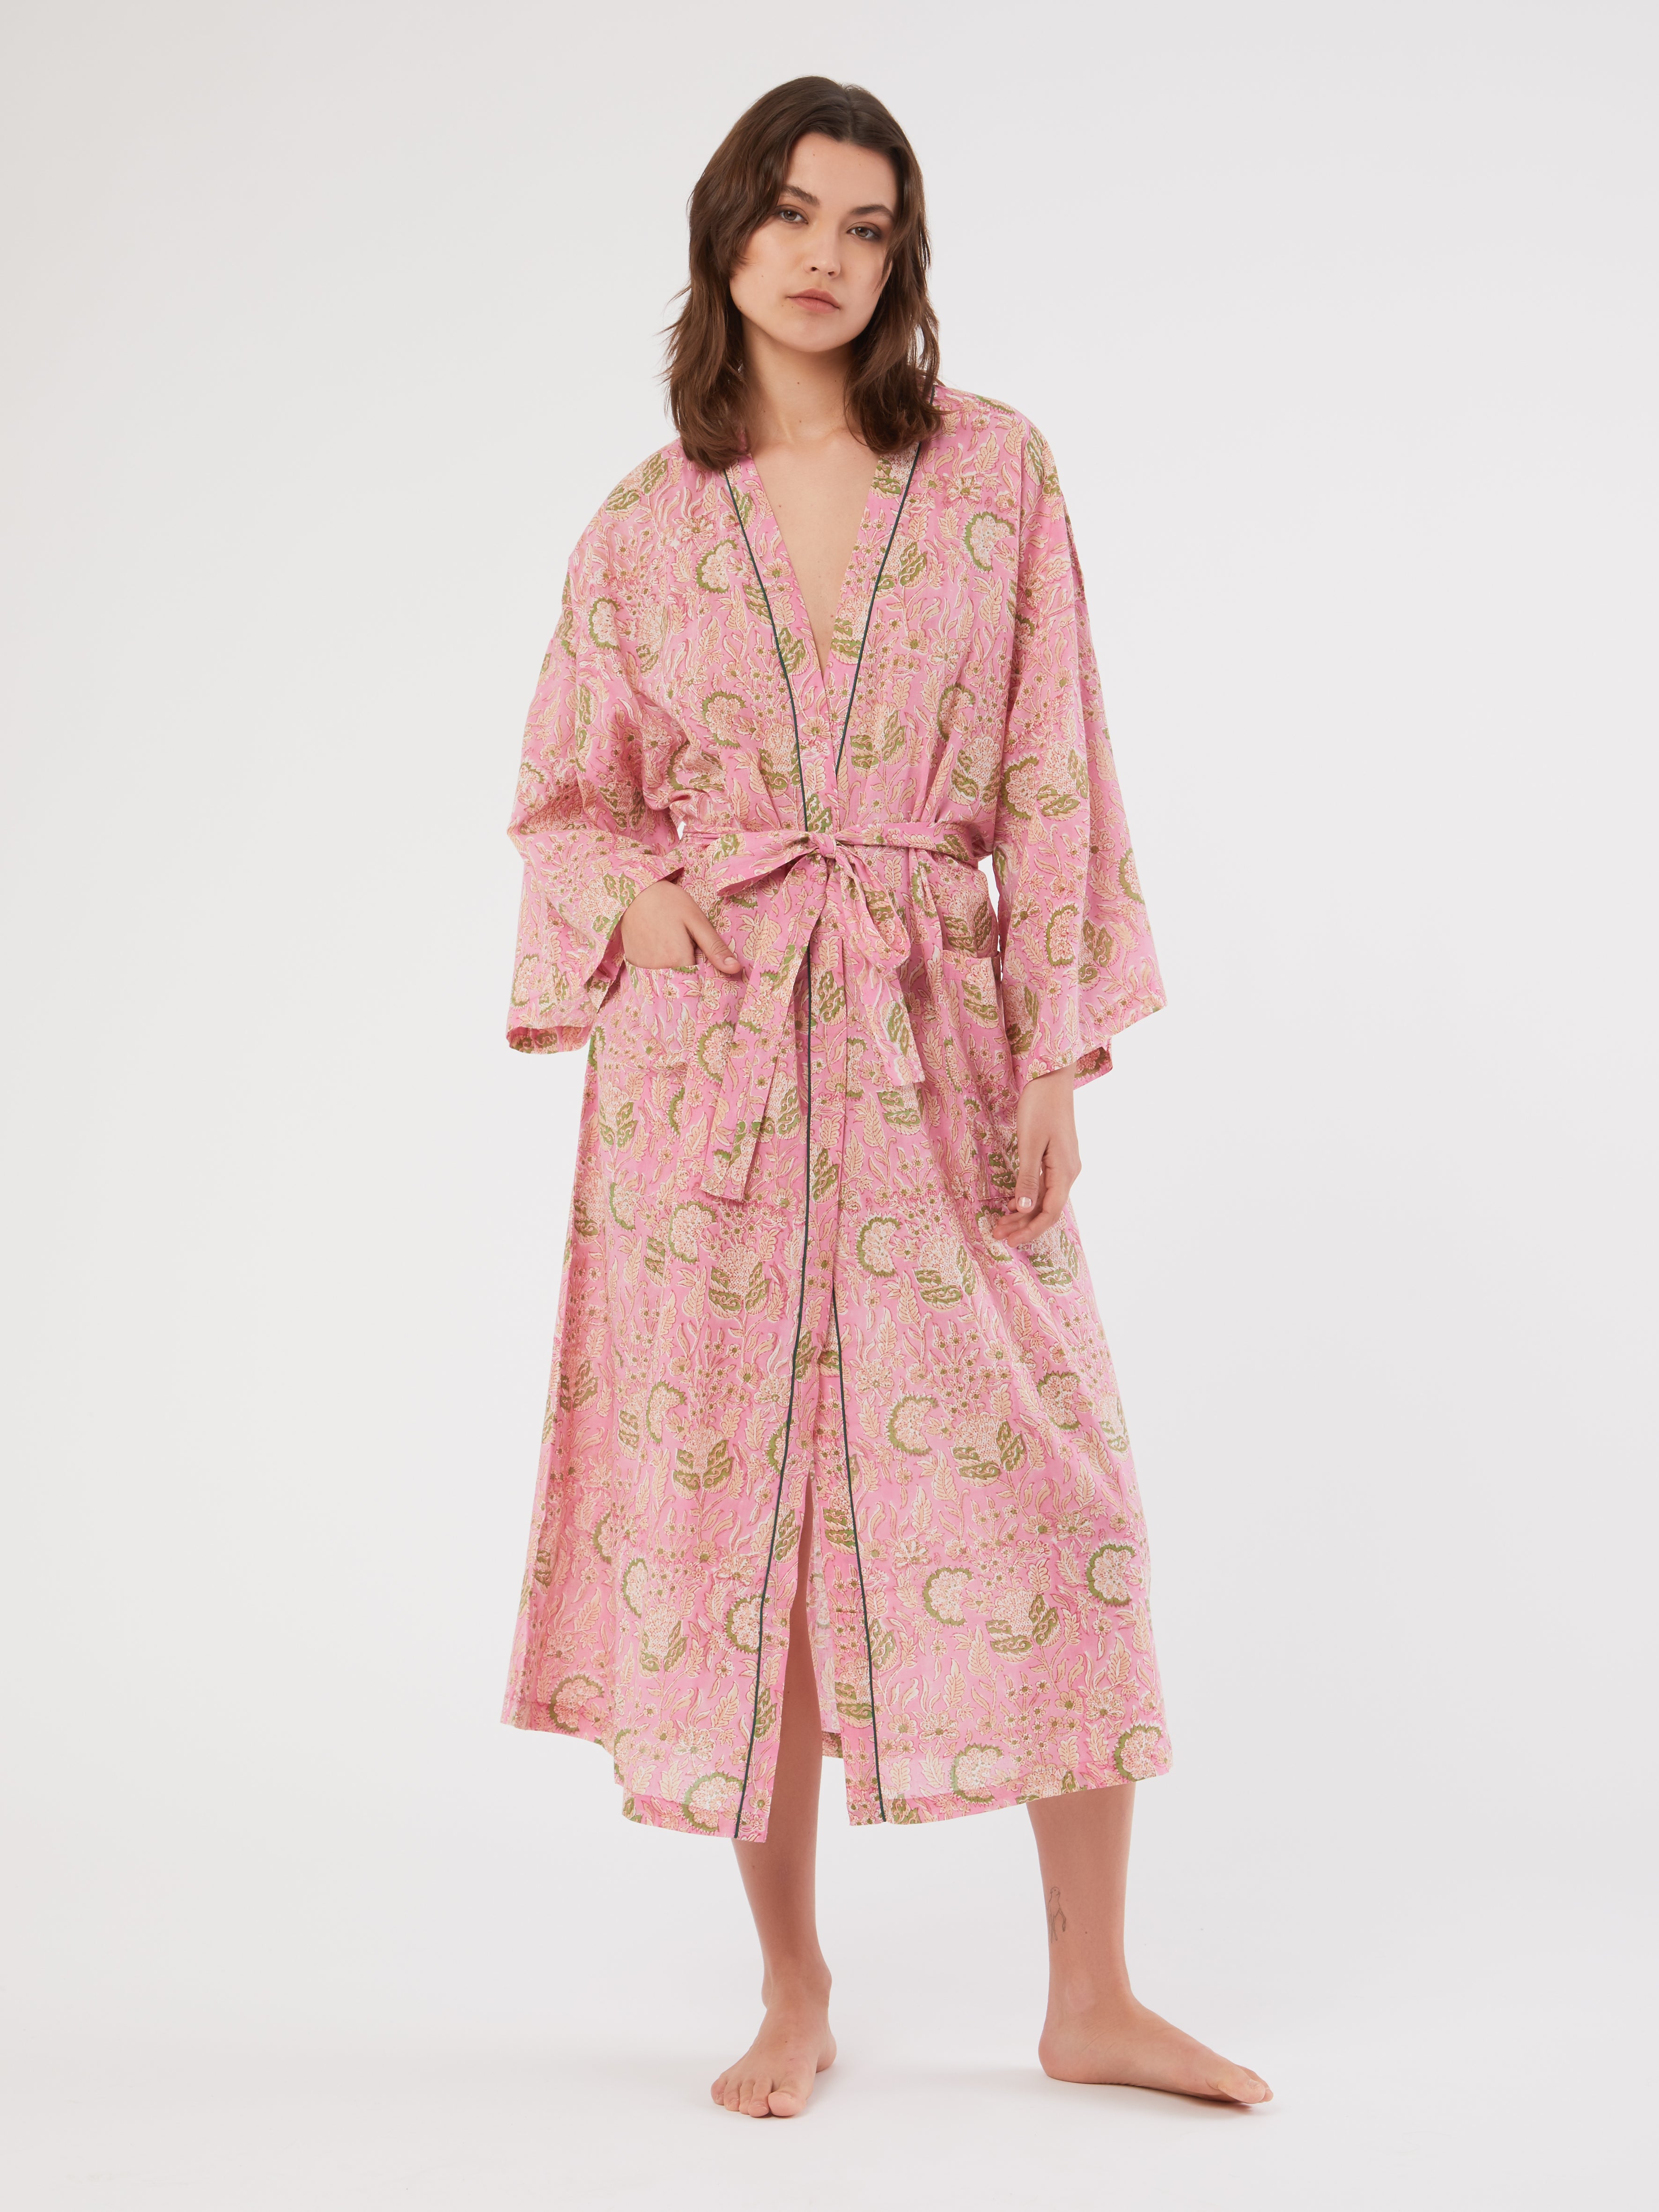 Unique cotton block-printed dressing gown, handmade in India by the local artisans. Refined with a belt and pockets, pack your nightgown for an exotic trip or wear it in the comfort of your own city home at winter time! DETAILS AND CARE Pink and green pattern with green piping 100% cotton Hand wash with cold water and mild detergent Do not soak Dry in the shade, direct sunlight can fade color As all handmade prints, there may be a small amount of residual color in the fabric ONE SIZE